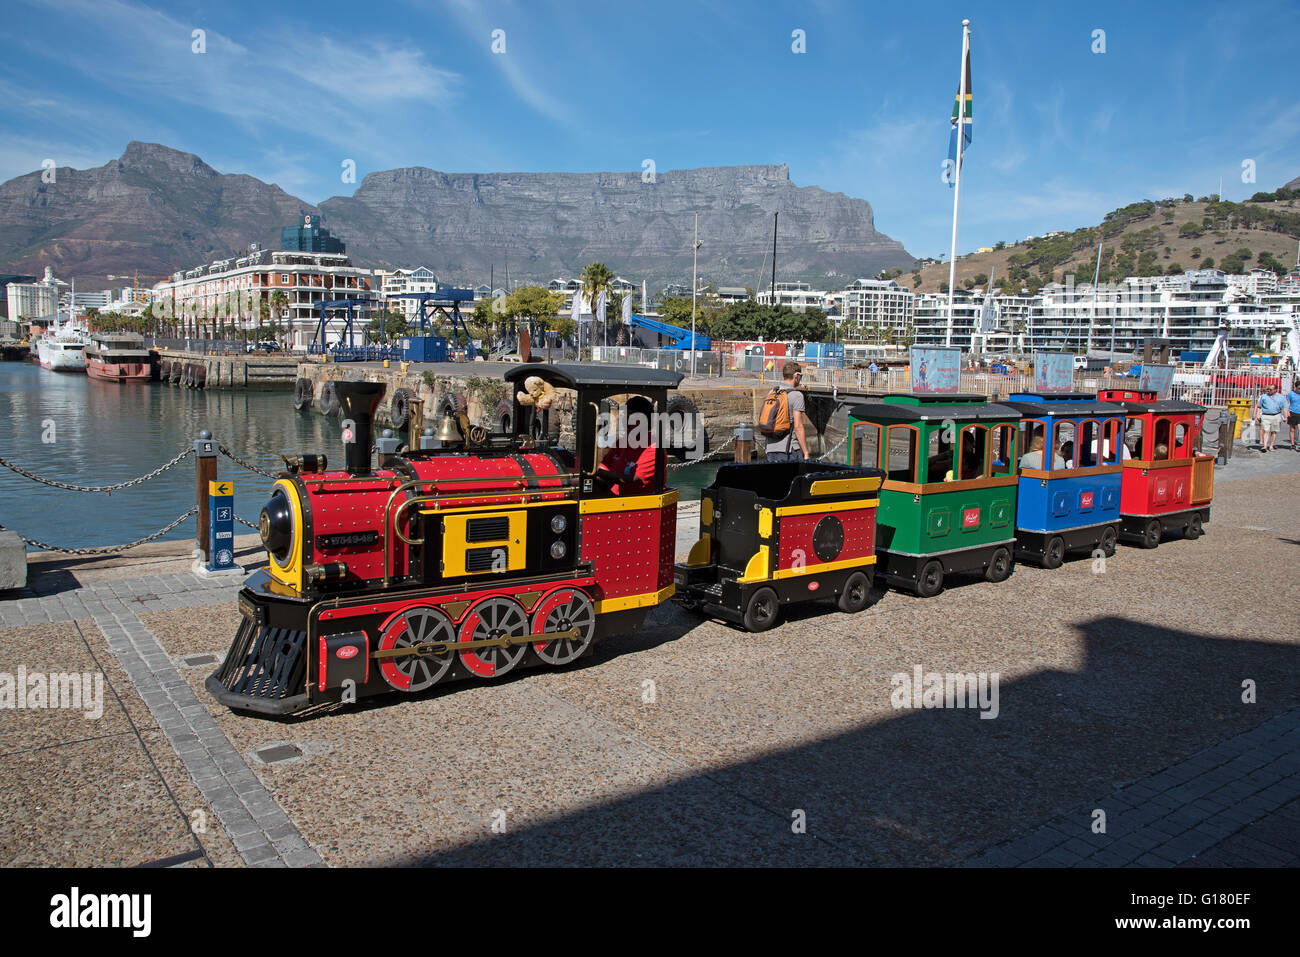 CAPE TOWN WATERFRONT SOUTH AFRICA  A children's train ride around the waterfront with a back drop of Table Mountain Stock Photo